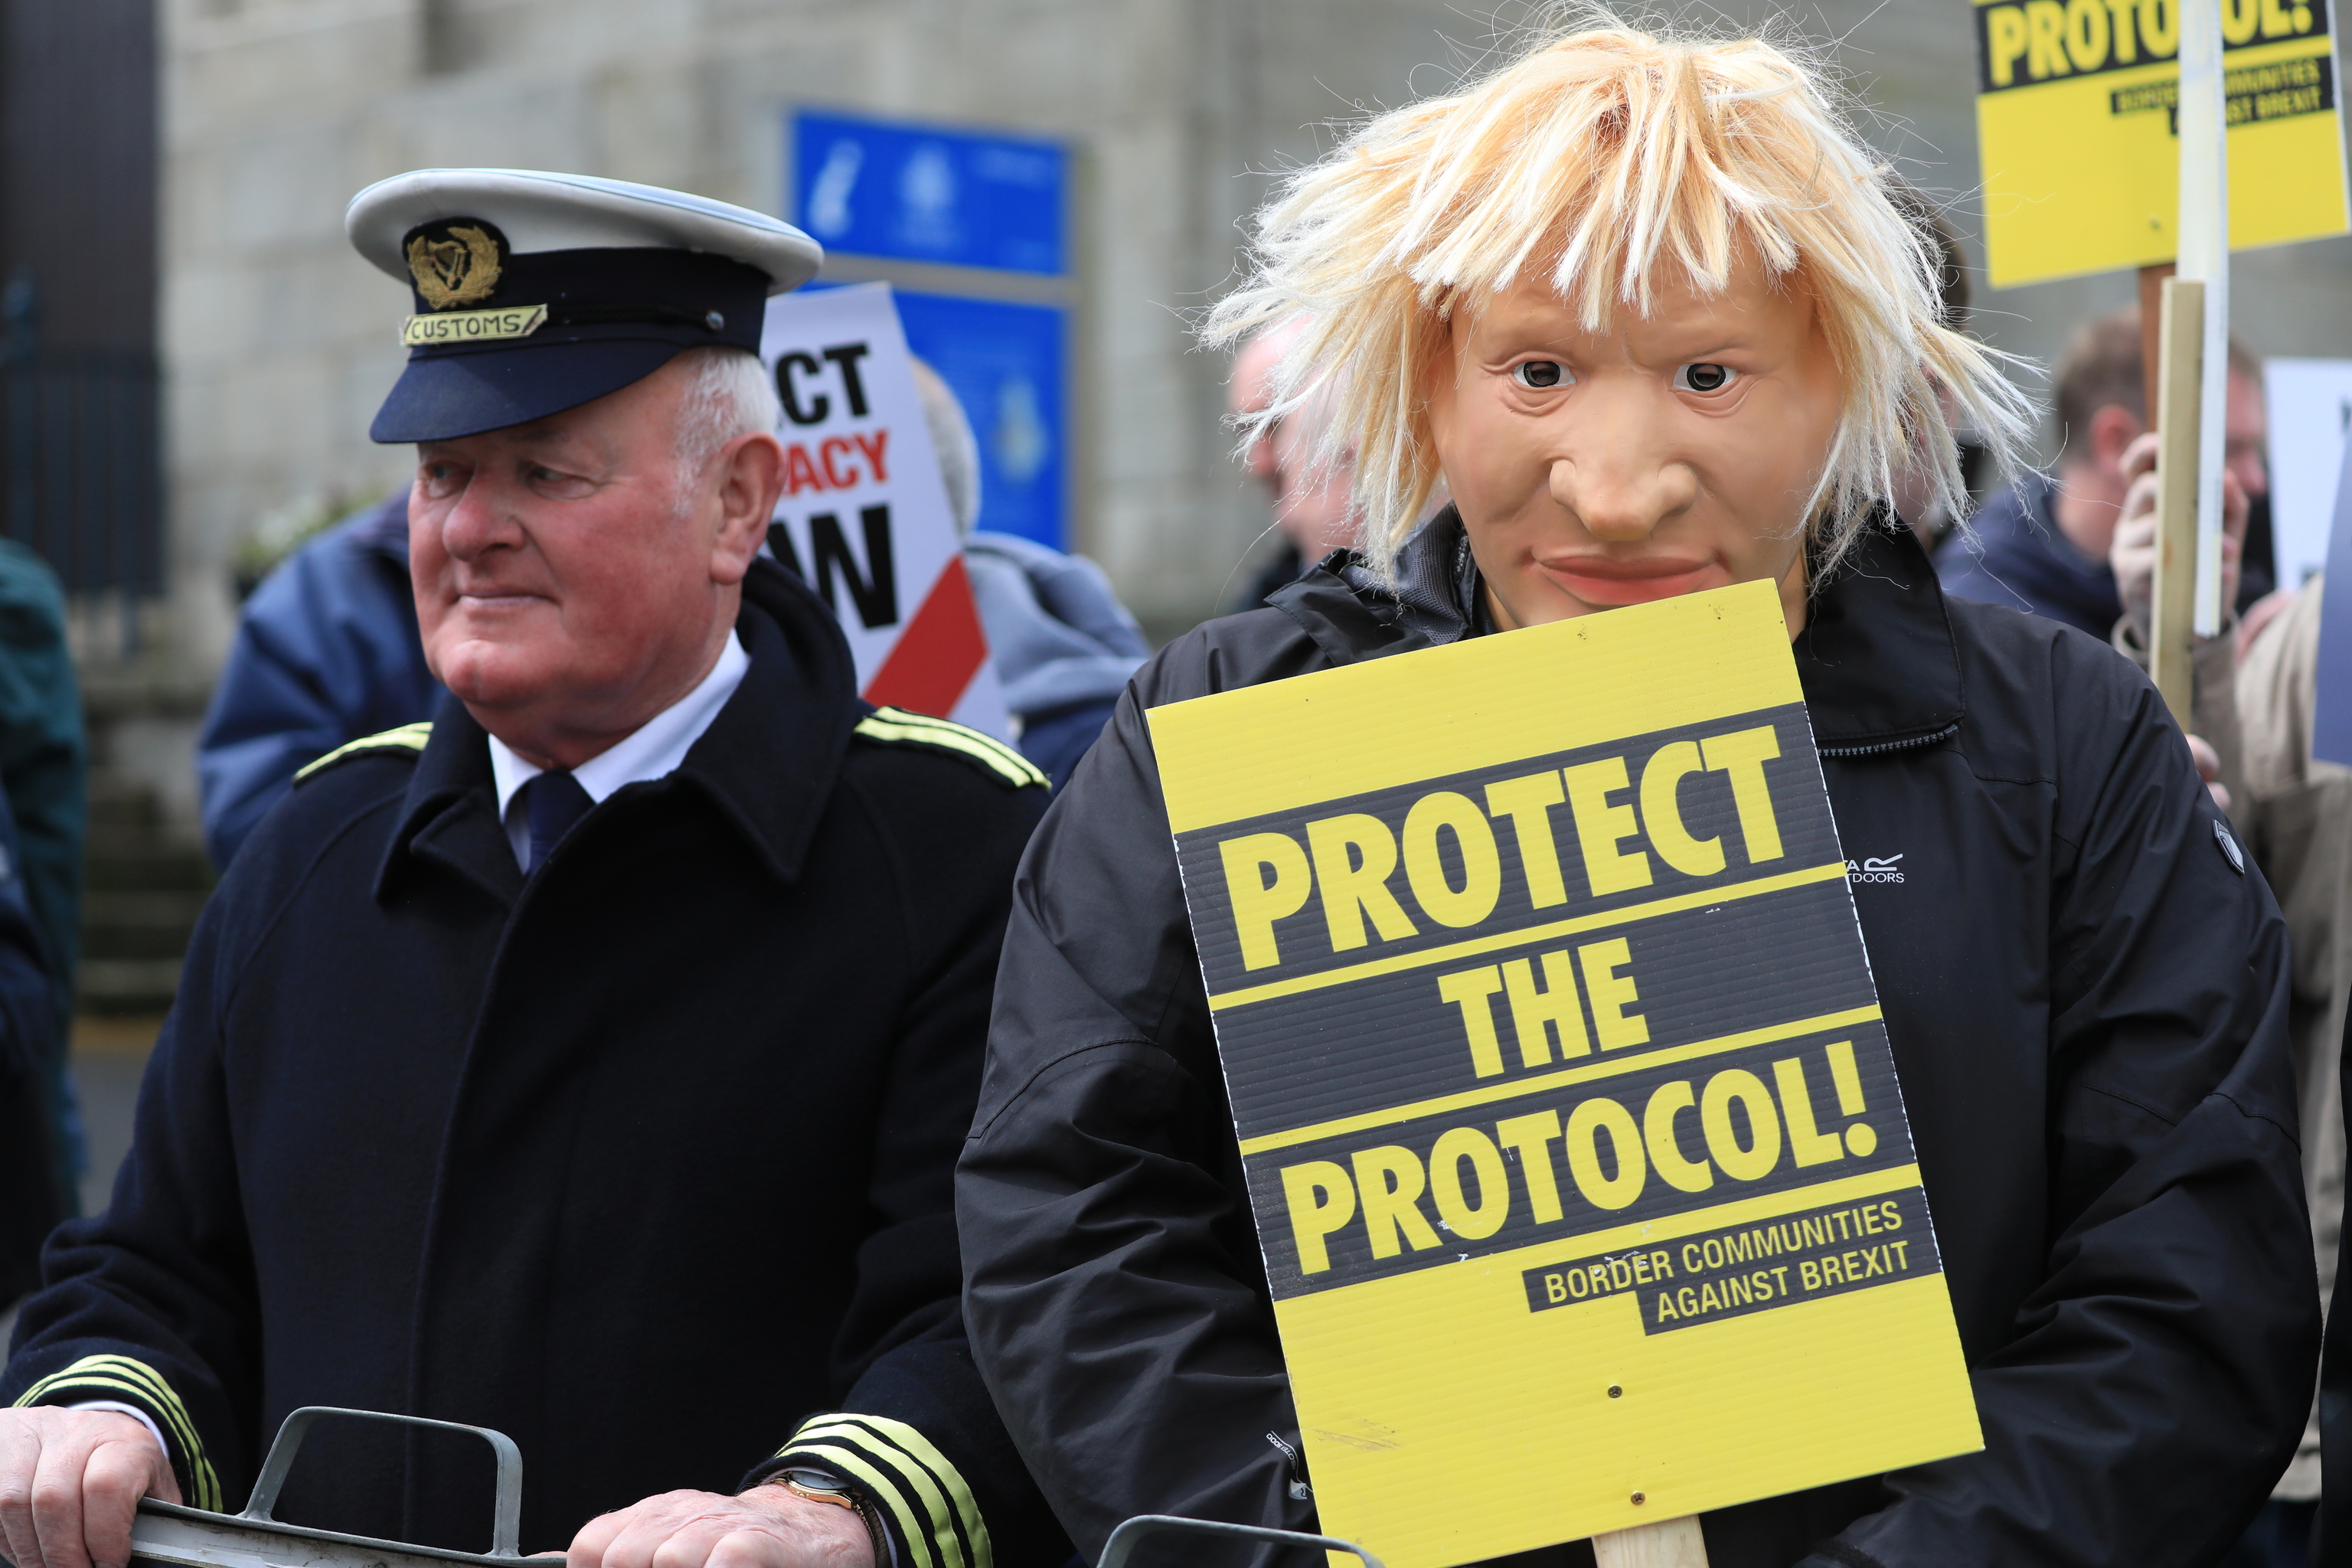 Protests at Hillsborough Castle (Northern Ireland) during the visit of Boris Johnson.